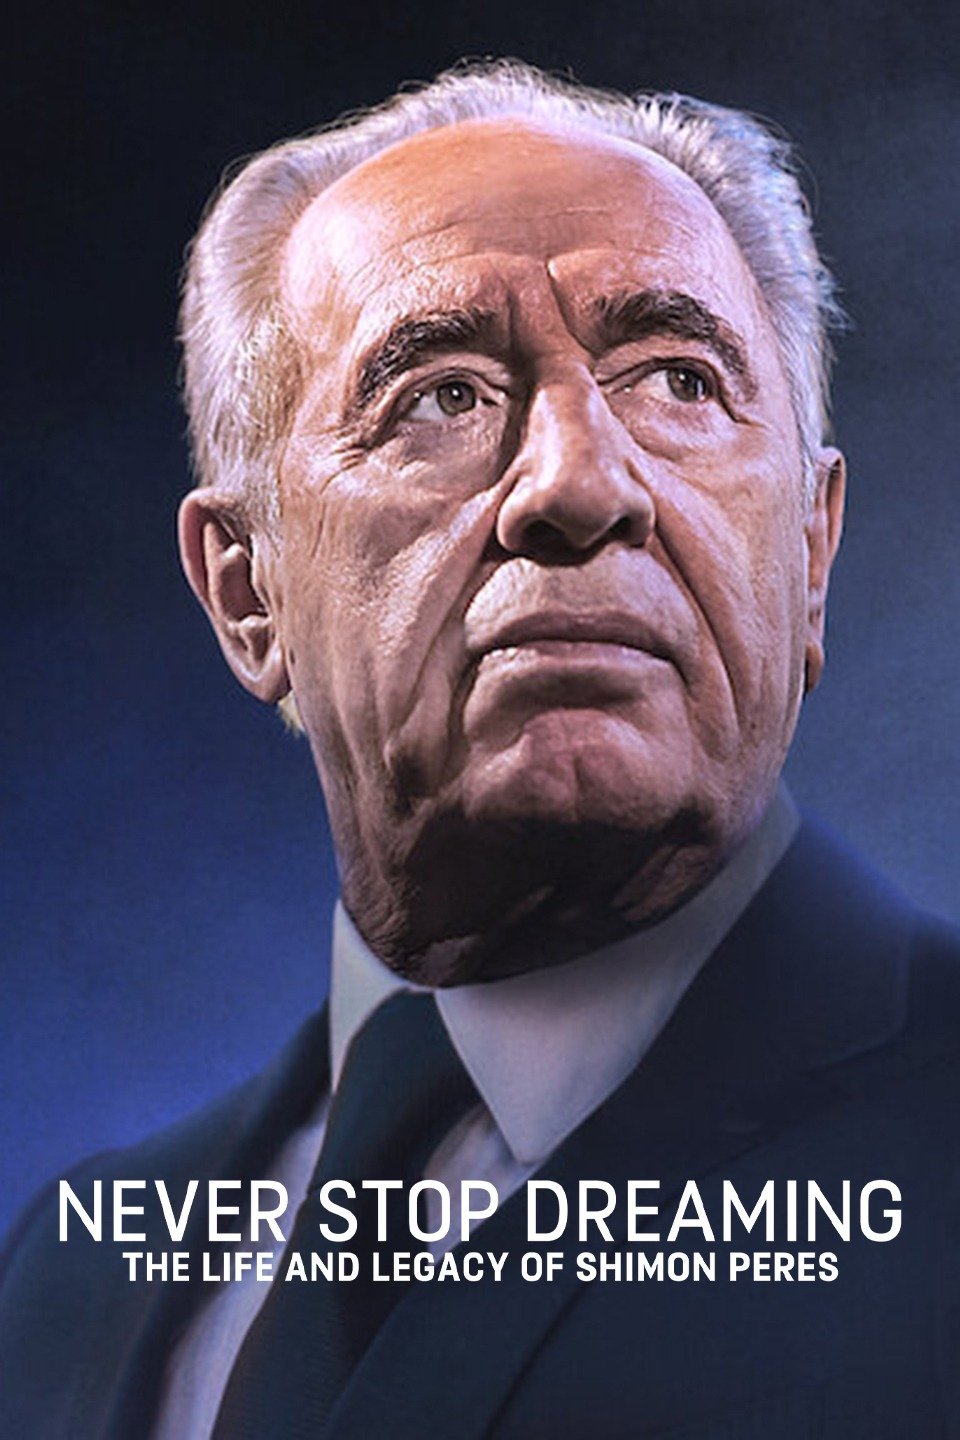 Is “Never Stop Dreaming The Life and Legacy of Shimon Peres” on Netflix